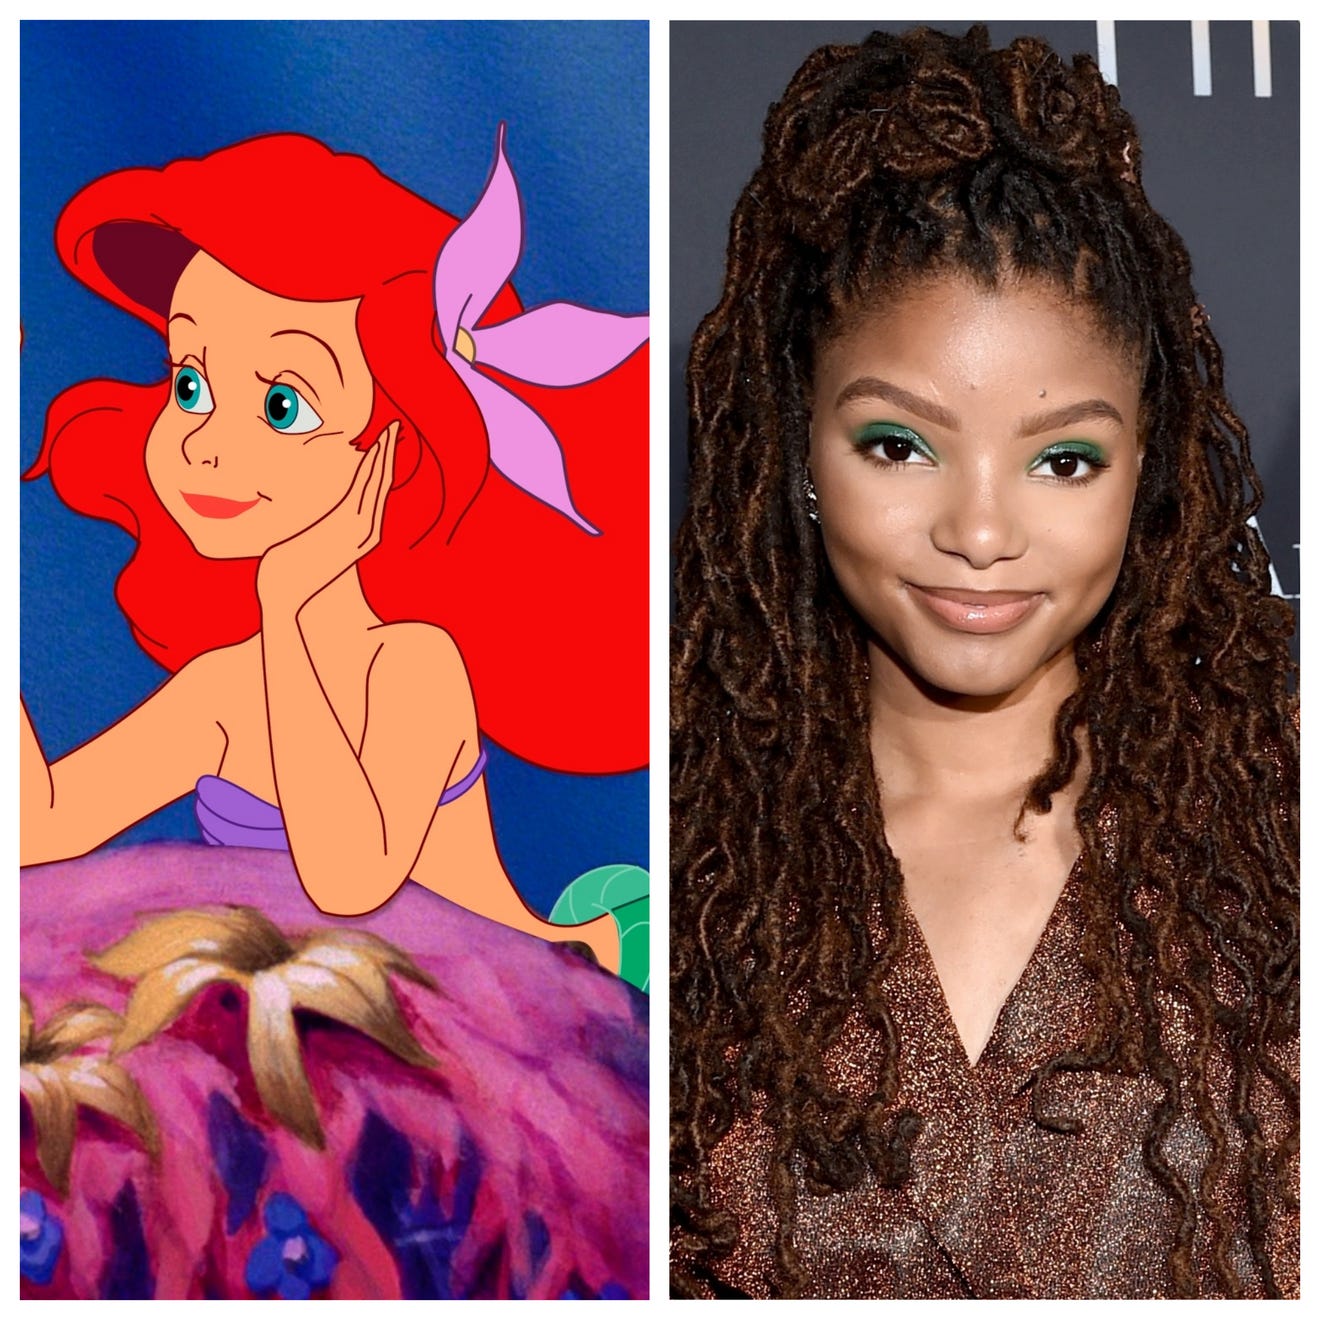 Halle Bailey shares first 'The Little Mermaid' reboot picture as Ariel